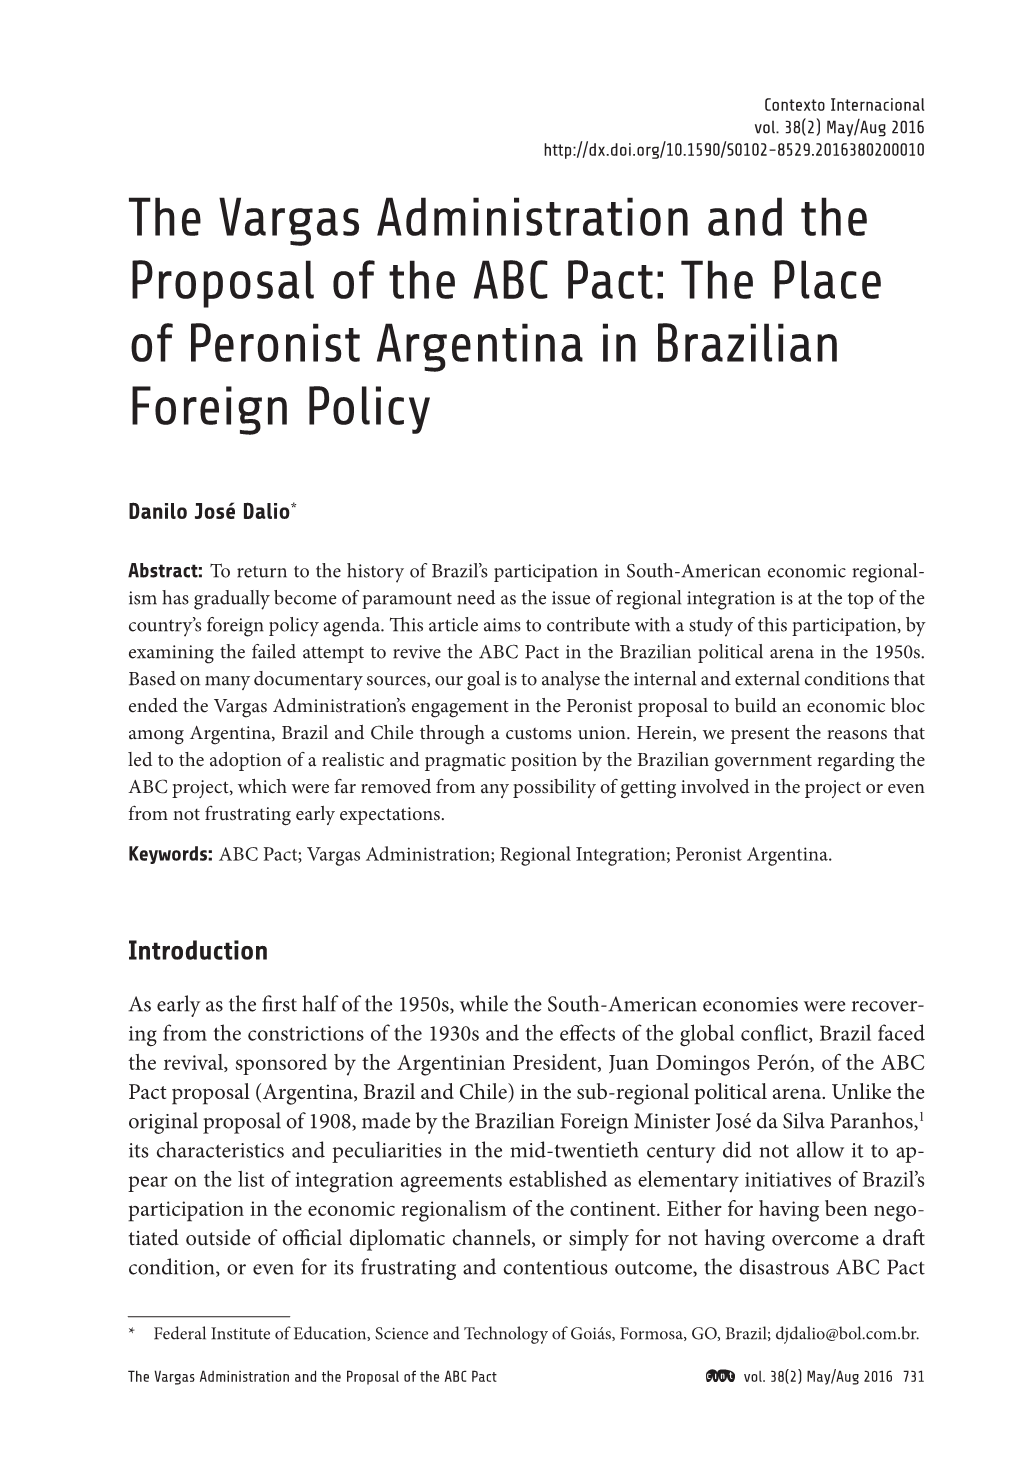 The Vargas Administration and the Proposal of the ABC Pact: the Place Dalio of Peronist Argentina in Brazilian Foreign Policy